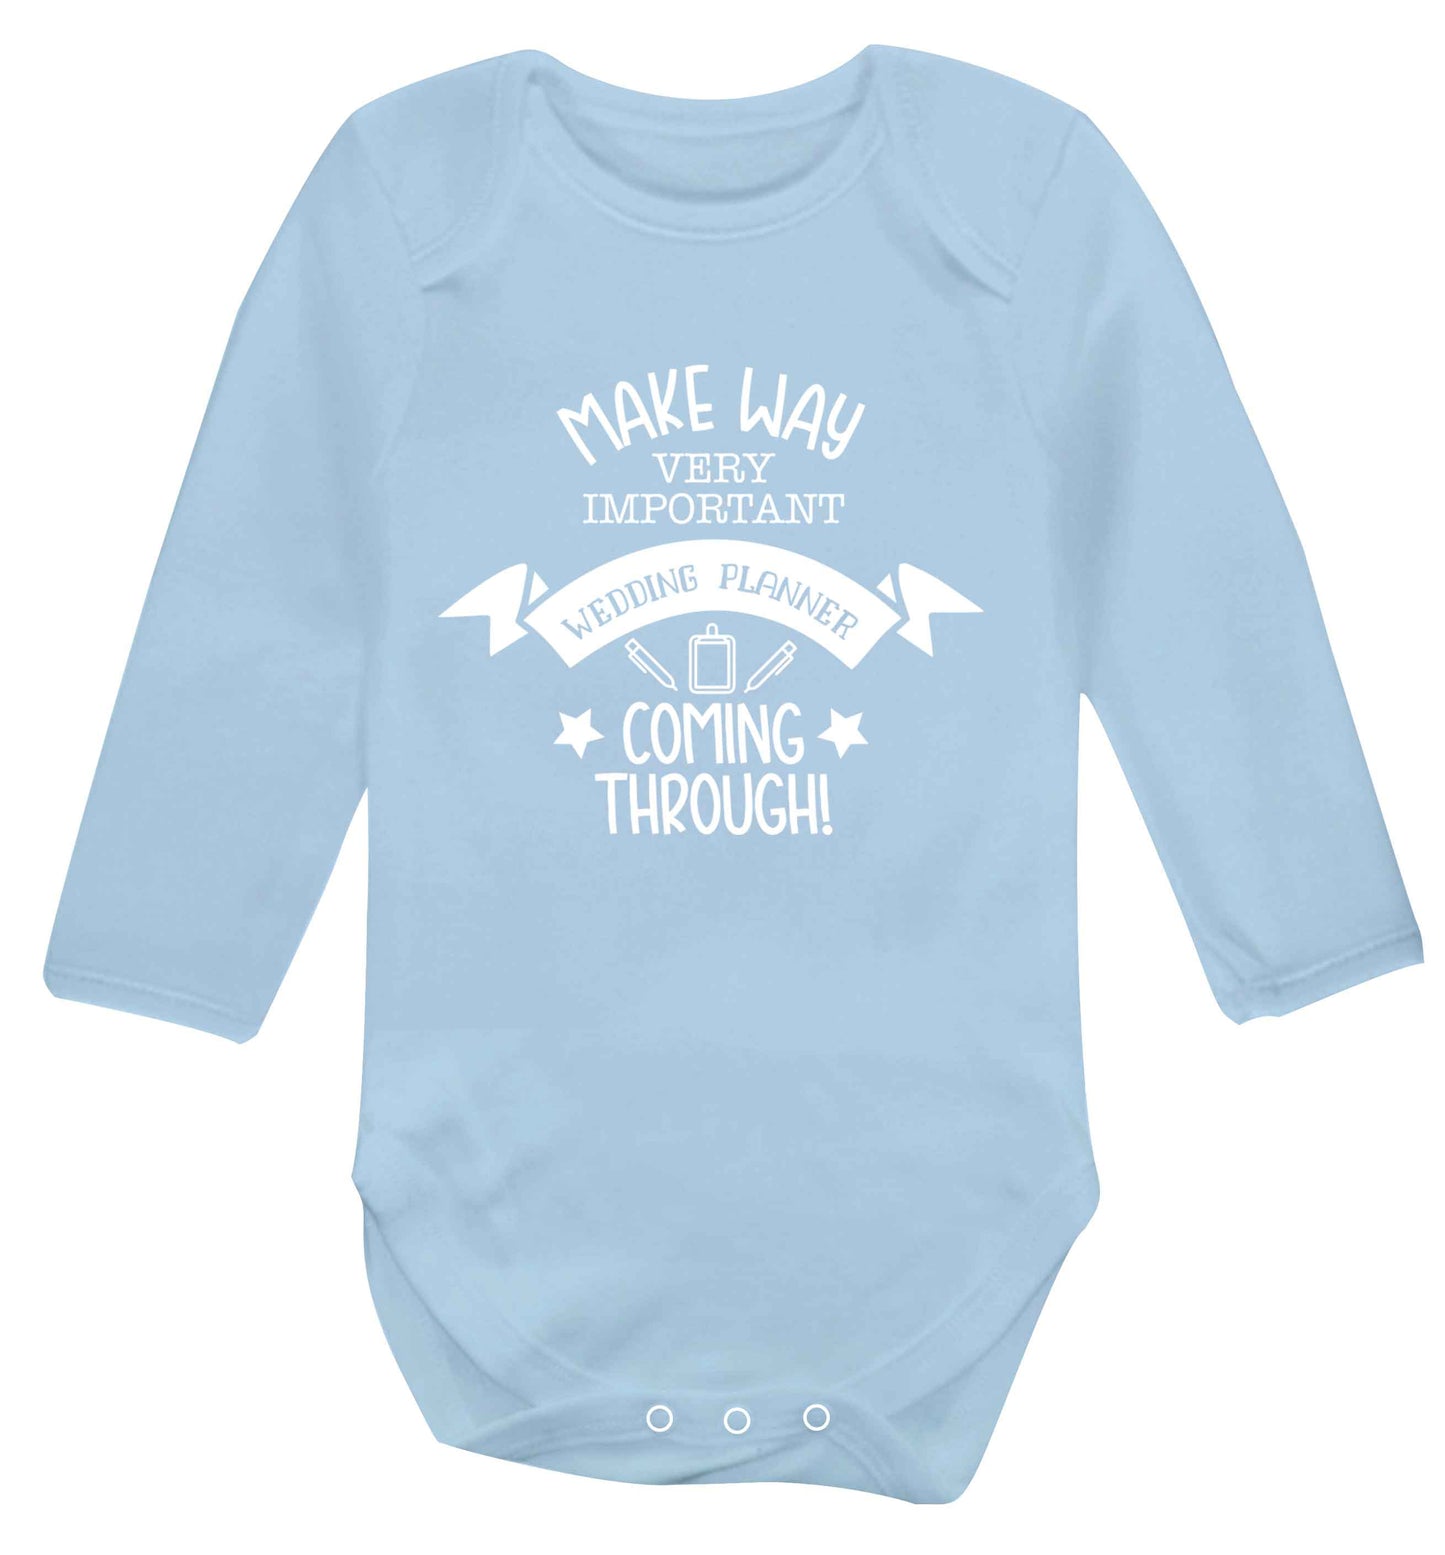 Make way very important wedding planner coming through Baby Vest long sleeved pale blue 6-12 months